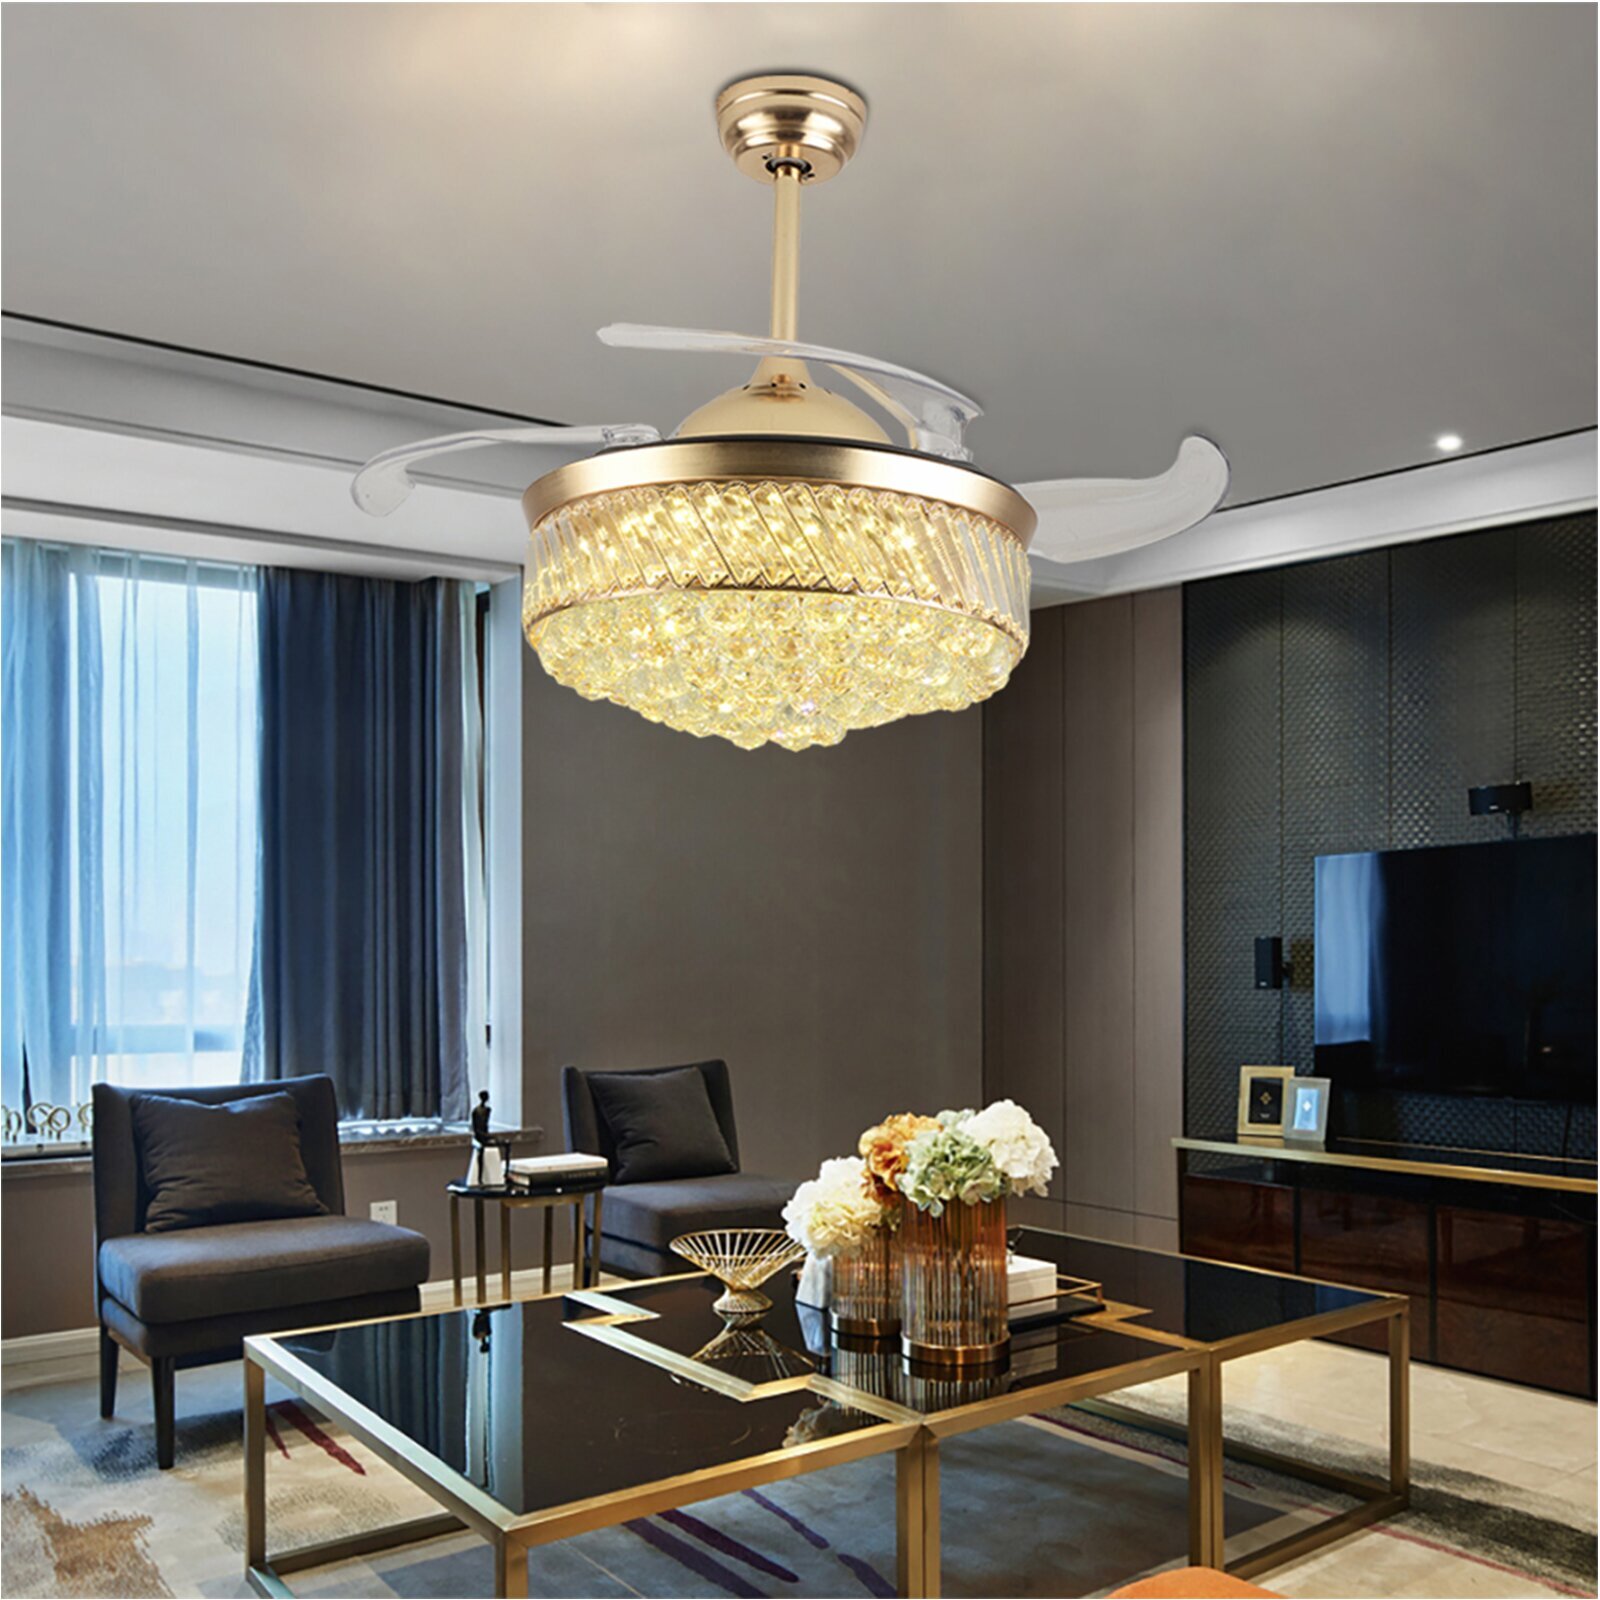 42 Inches Wide Ceiling Fan Clear Acrylic Blades Led Light Kits Crystal Chandelier Control Remote Chrome Finish Living Room Family Room